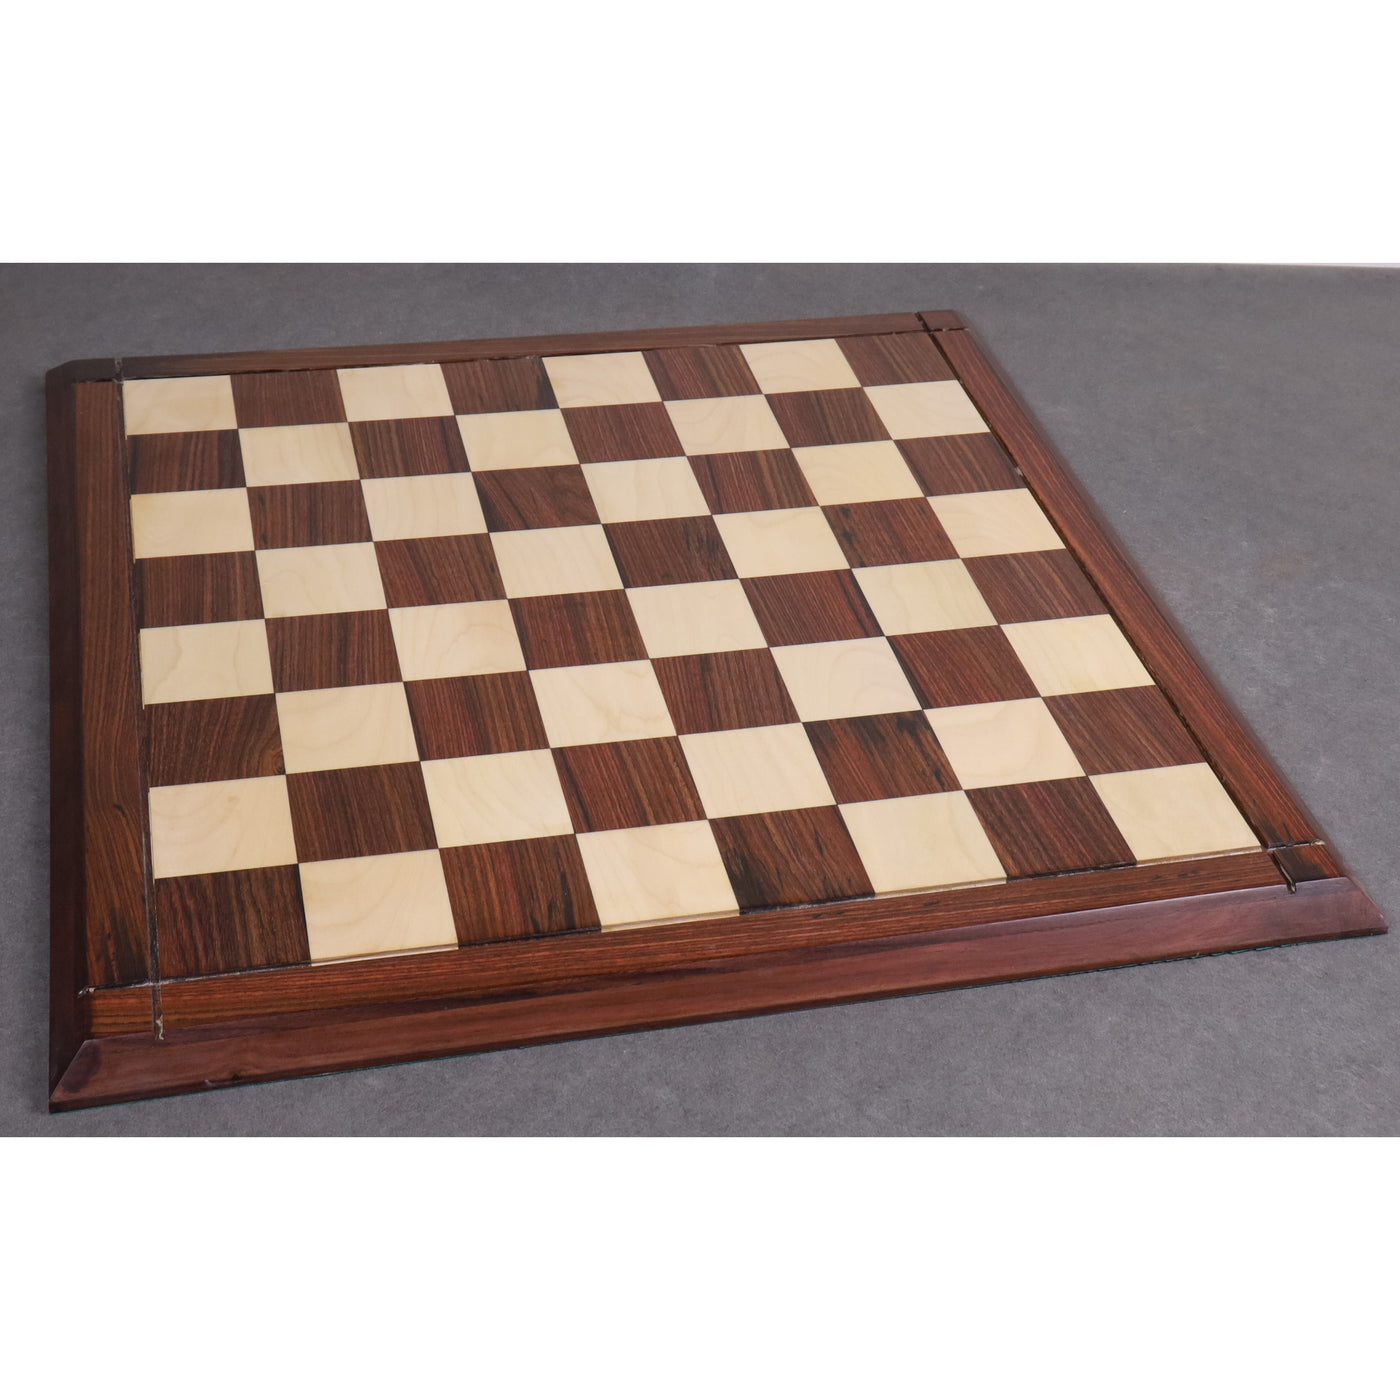 Rosewood & Maple Wood Chess board -Hand Carved Chess Pieces